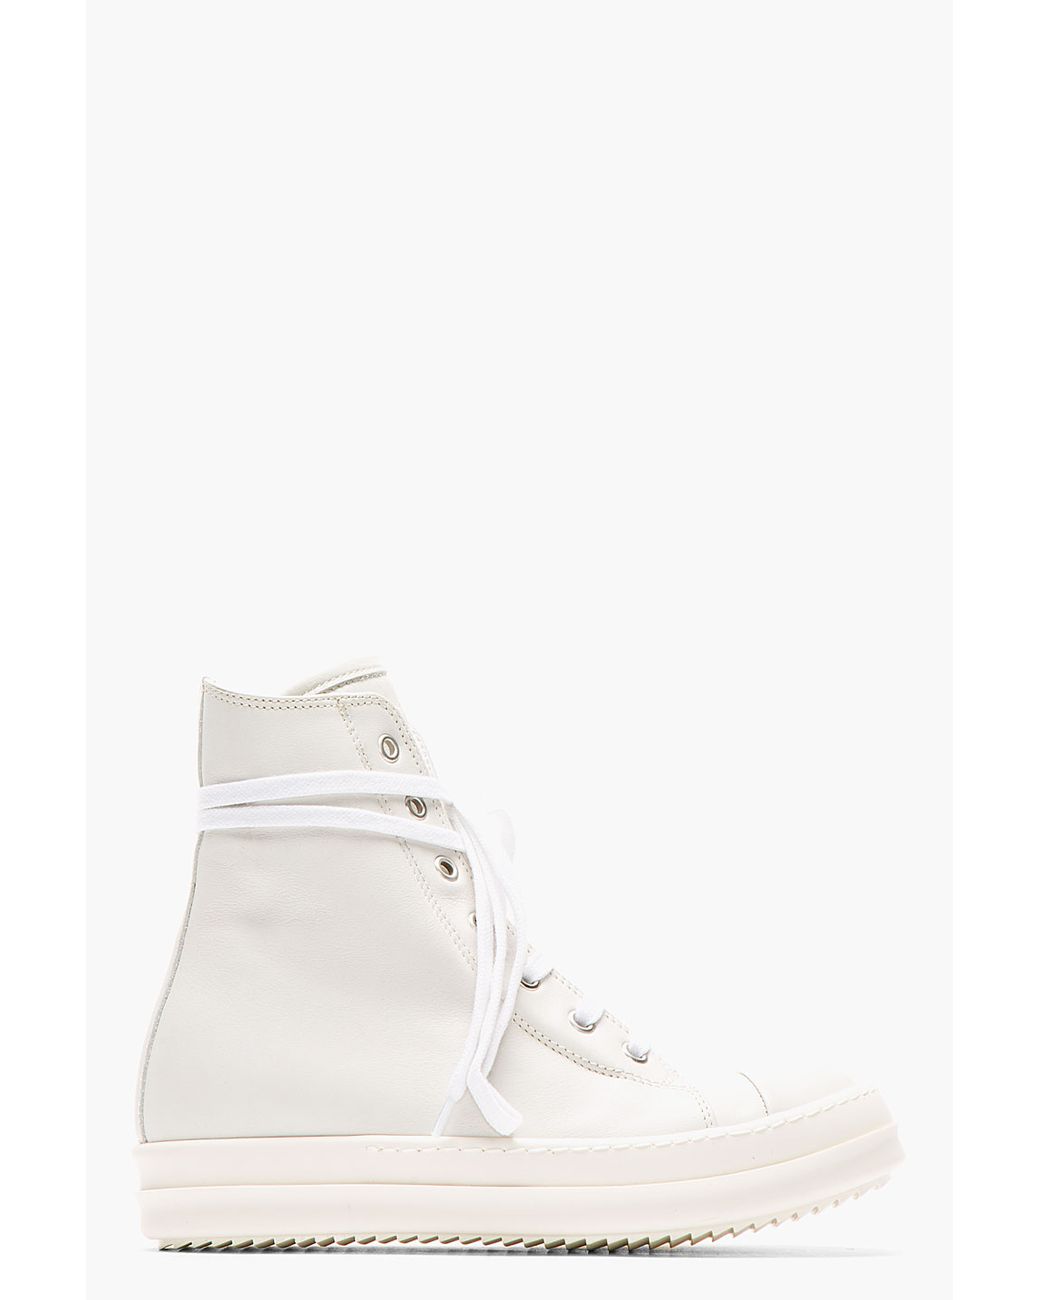 Rick Owens White Leather Ramones Sneakers | Lyst